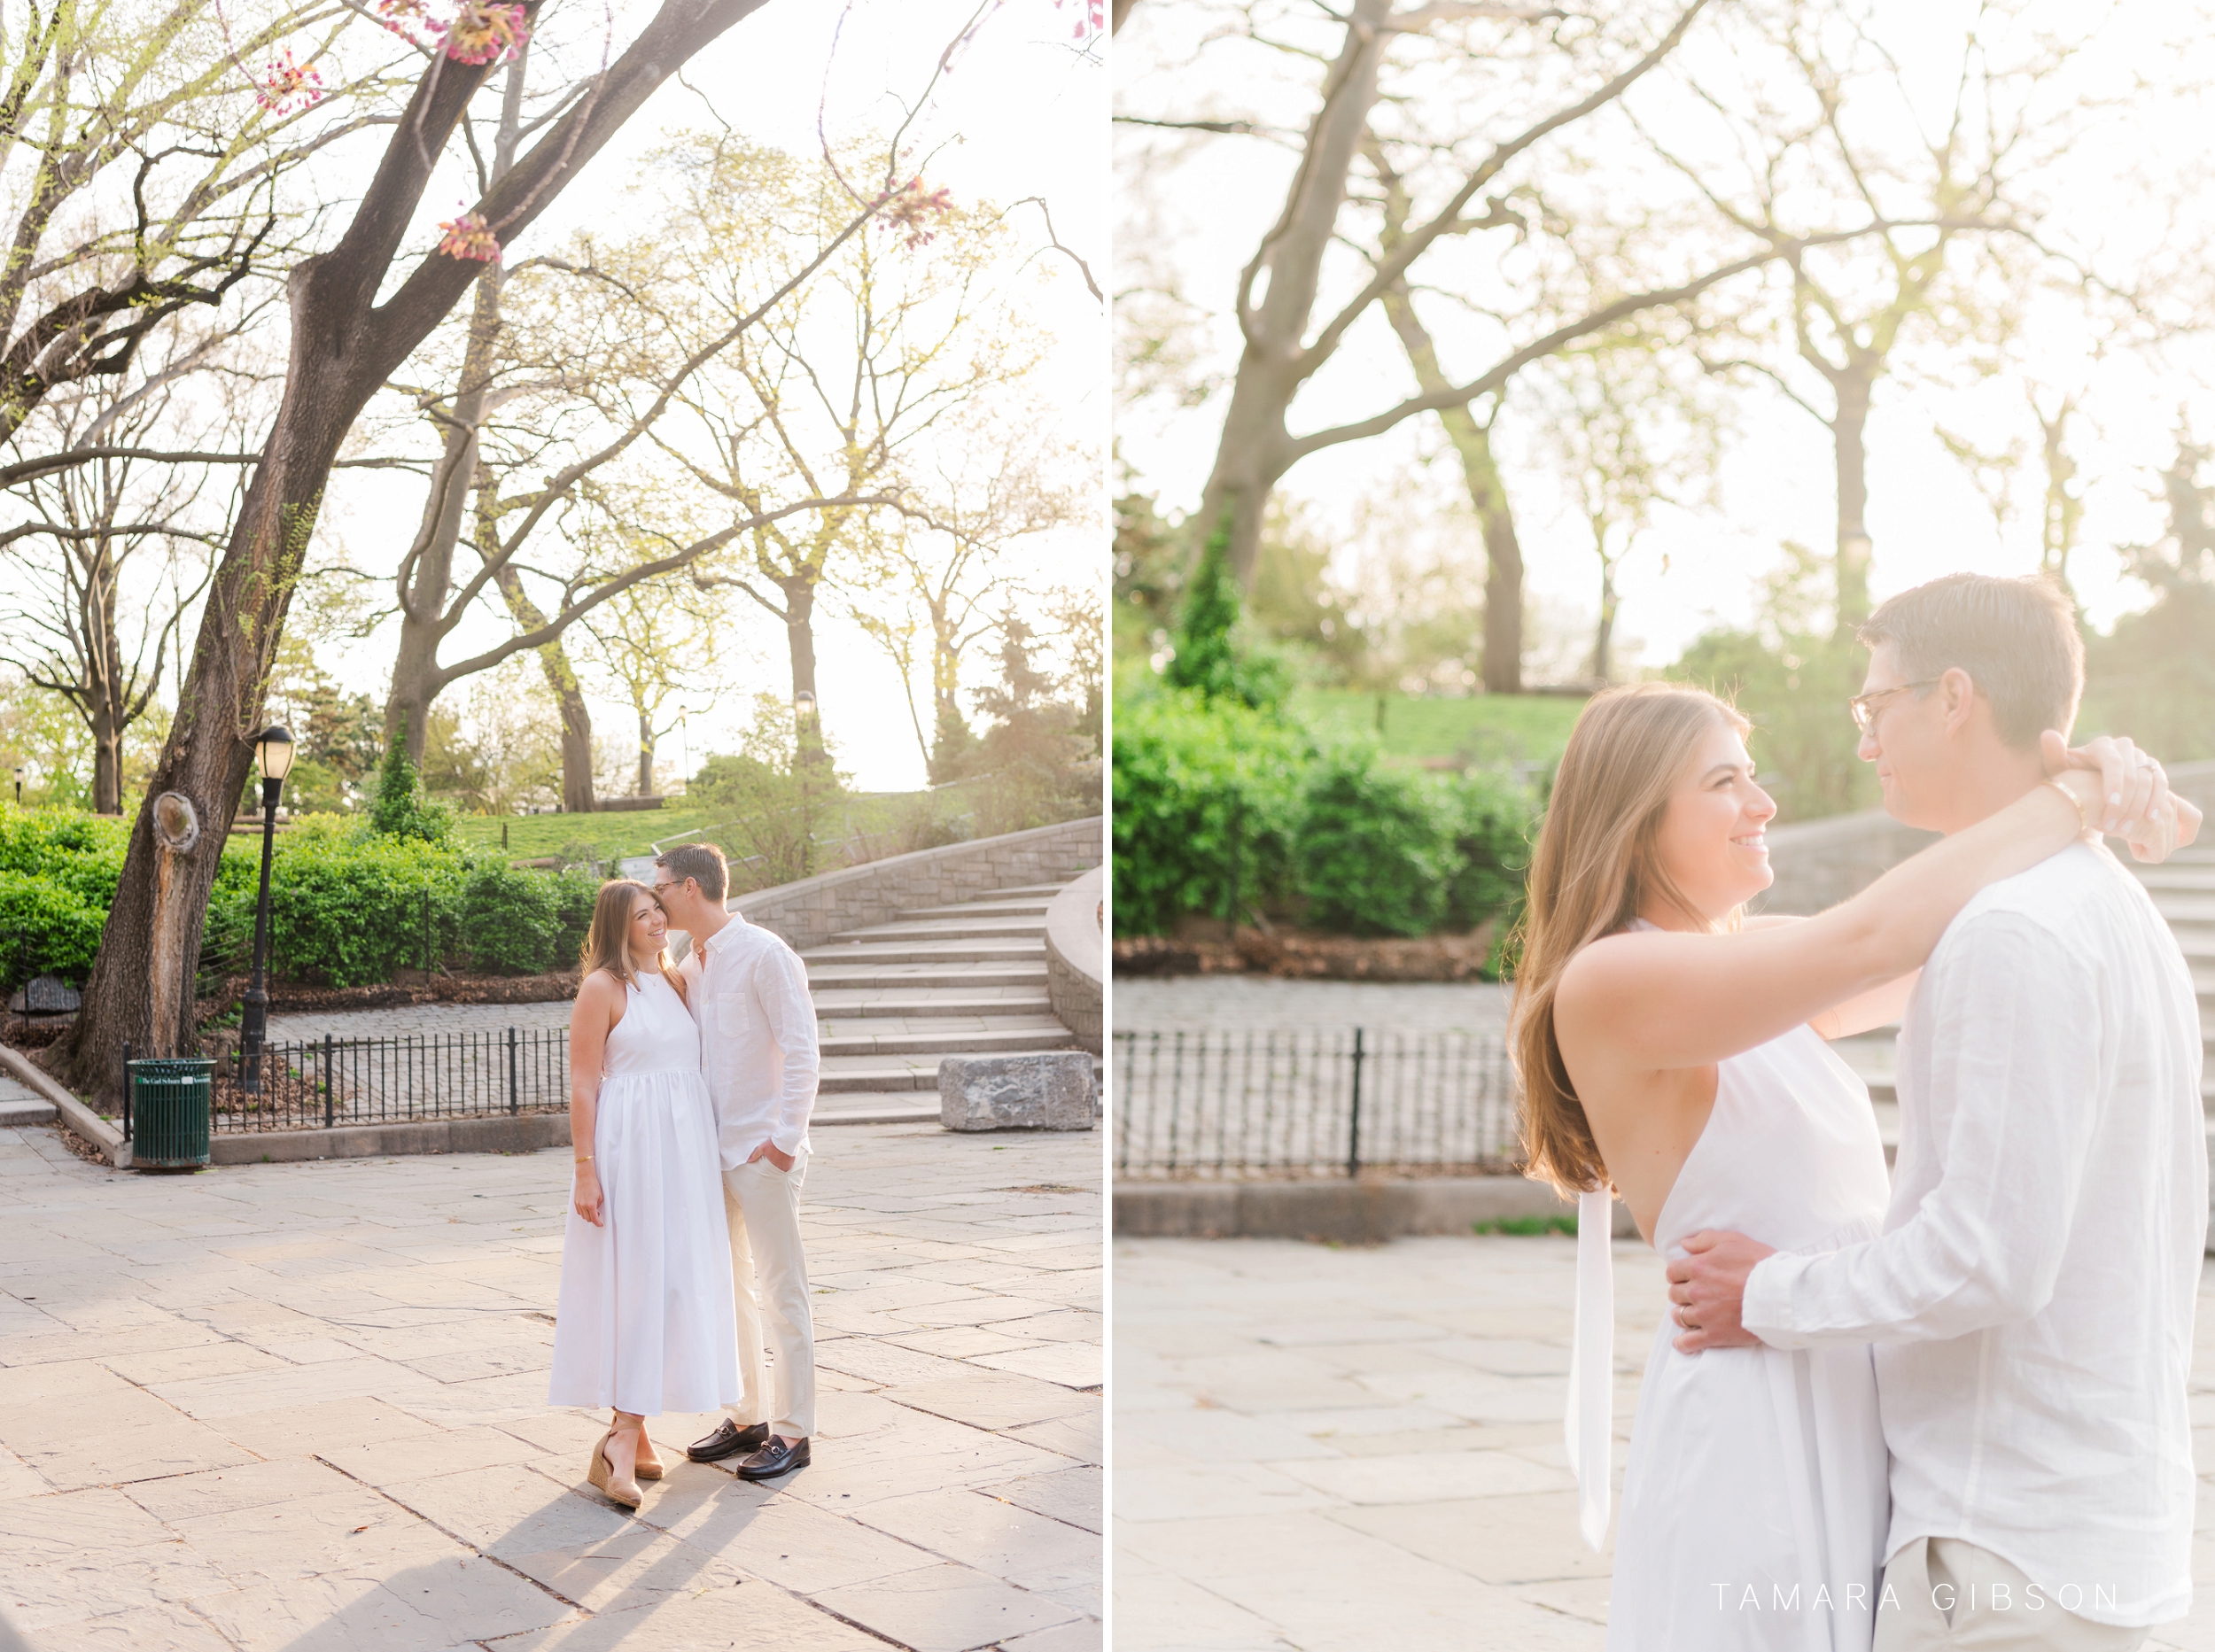 Collage of Couple at Carl Schurz Park during NYC Engagement Session